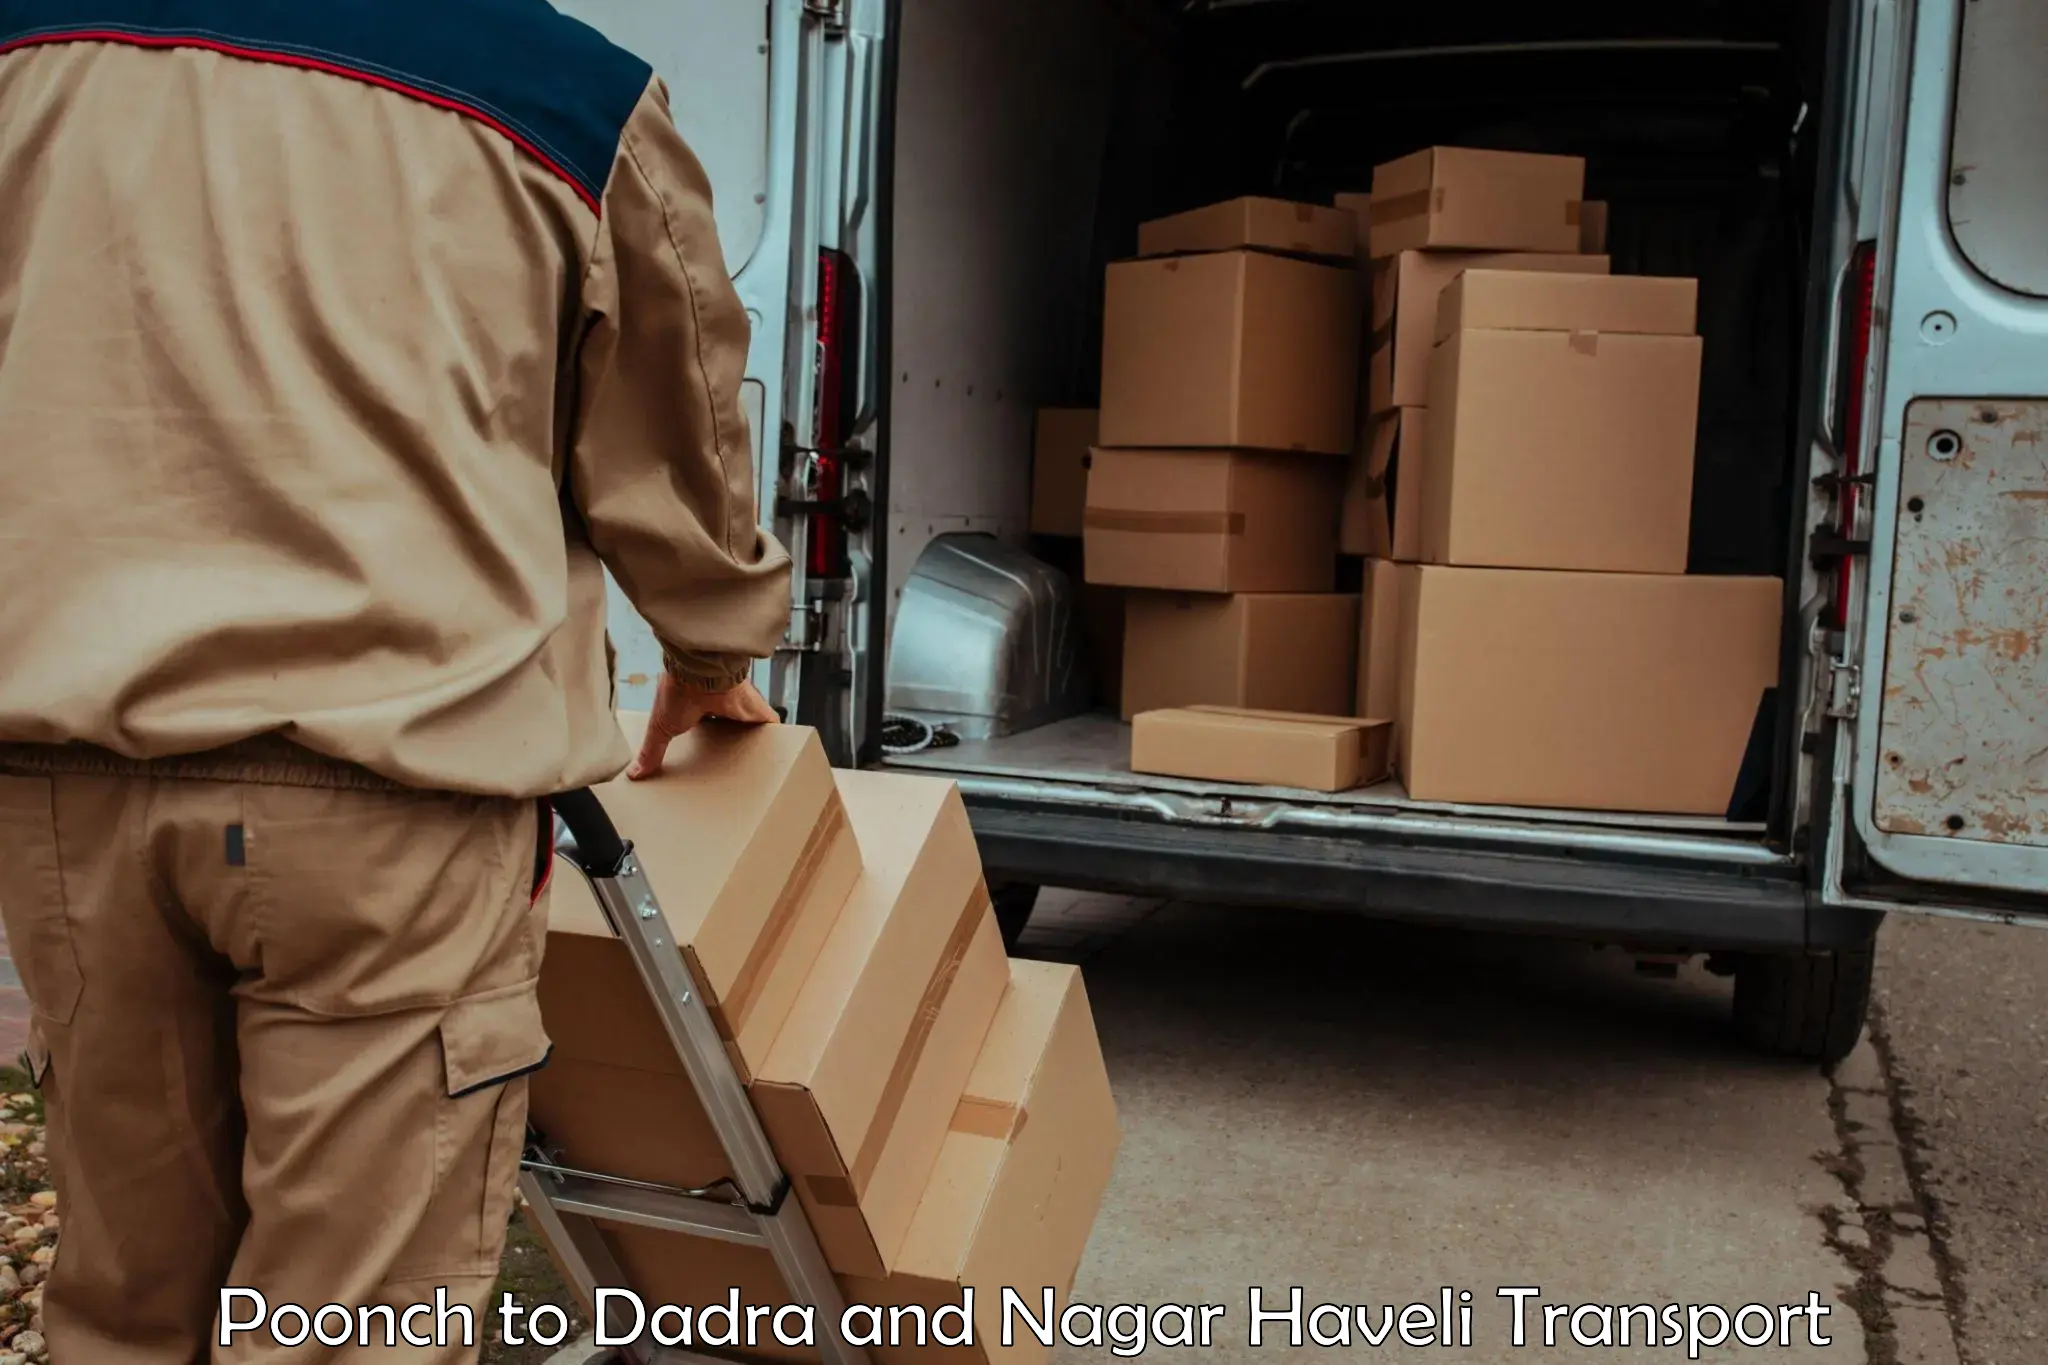 Container transport service Poonch to Dadra and Nagar Haveli